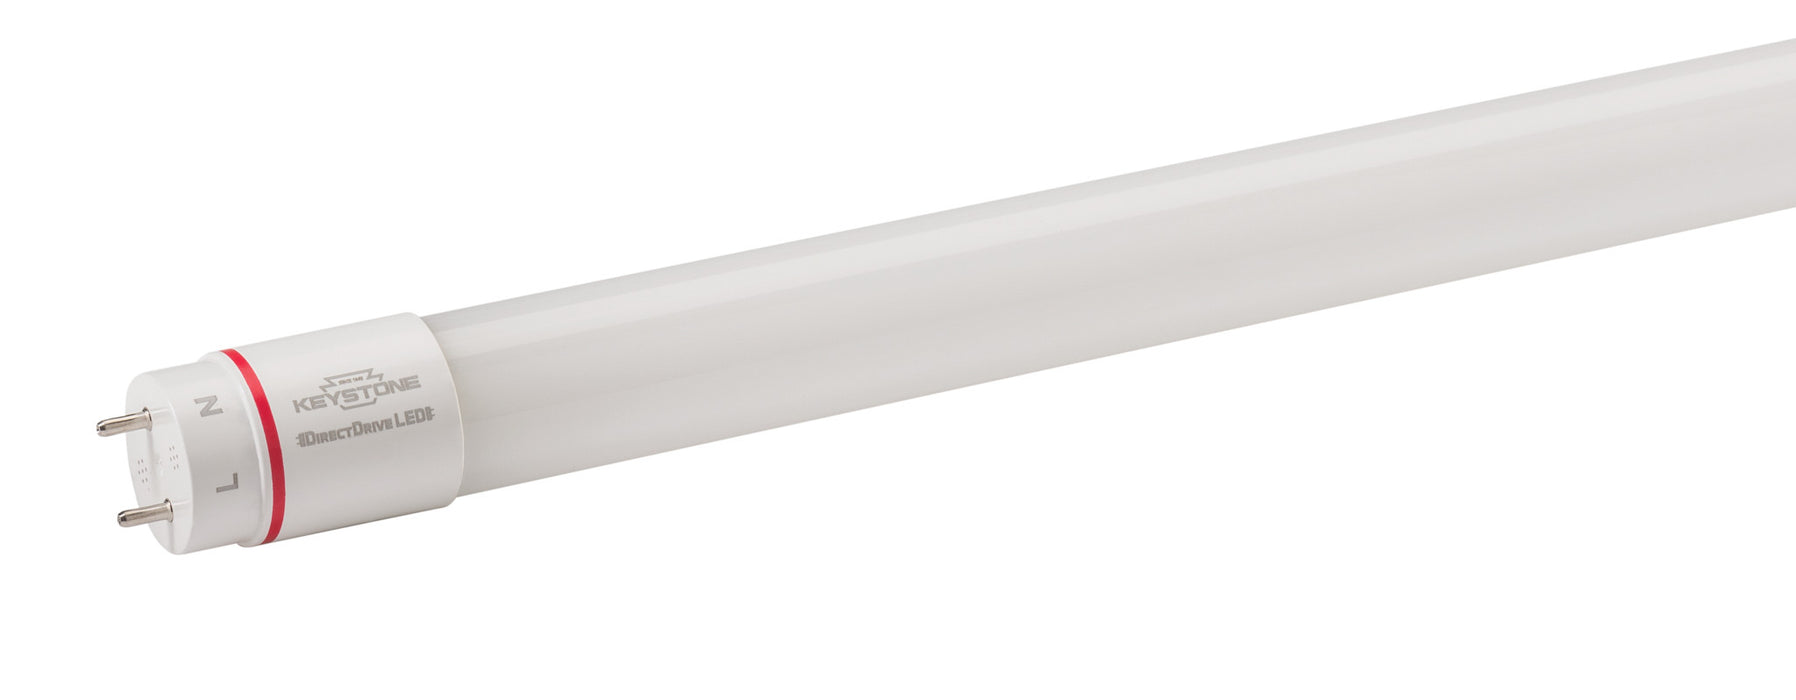 Keystone 15W LED T8 Tube 2200Lm Glass Construction 4 Foot 5000K 120-277V Input Direct Drive Double Ended Wiring Only Generation 2 (KT-LED15T8-48G-850-D2 /G2)